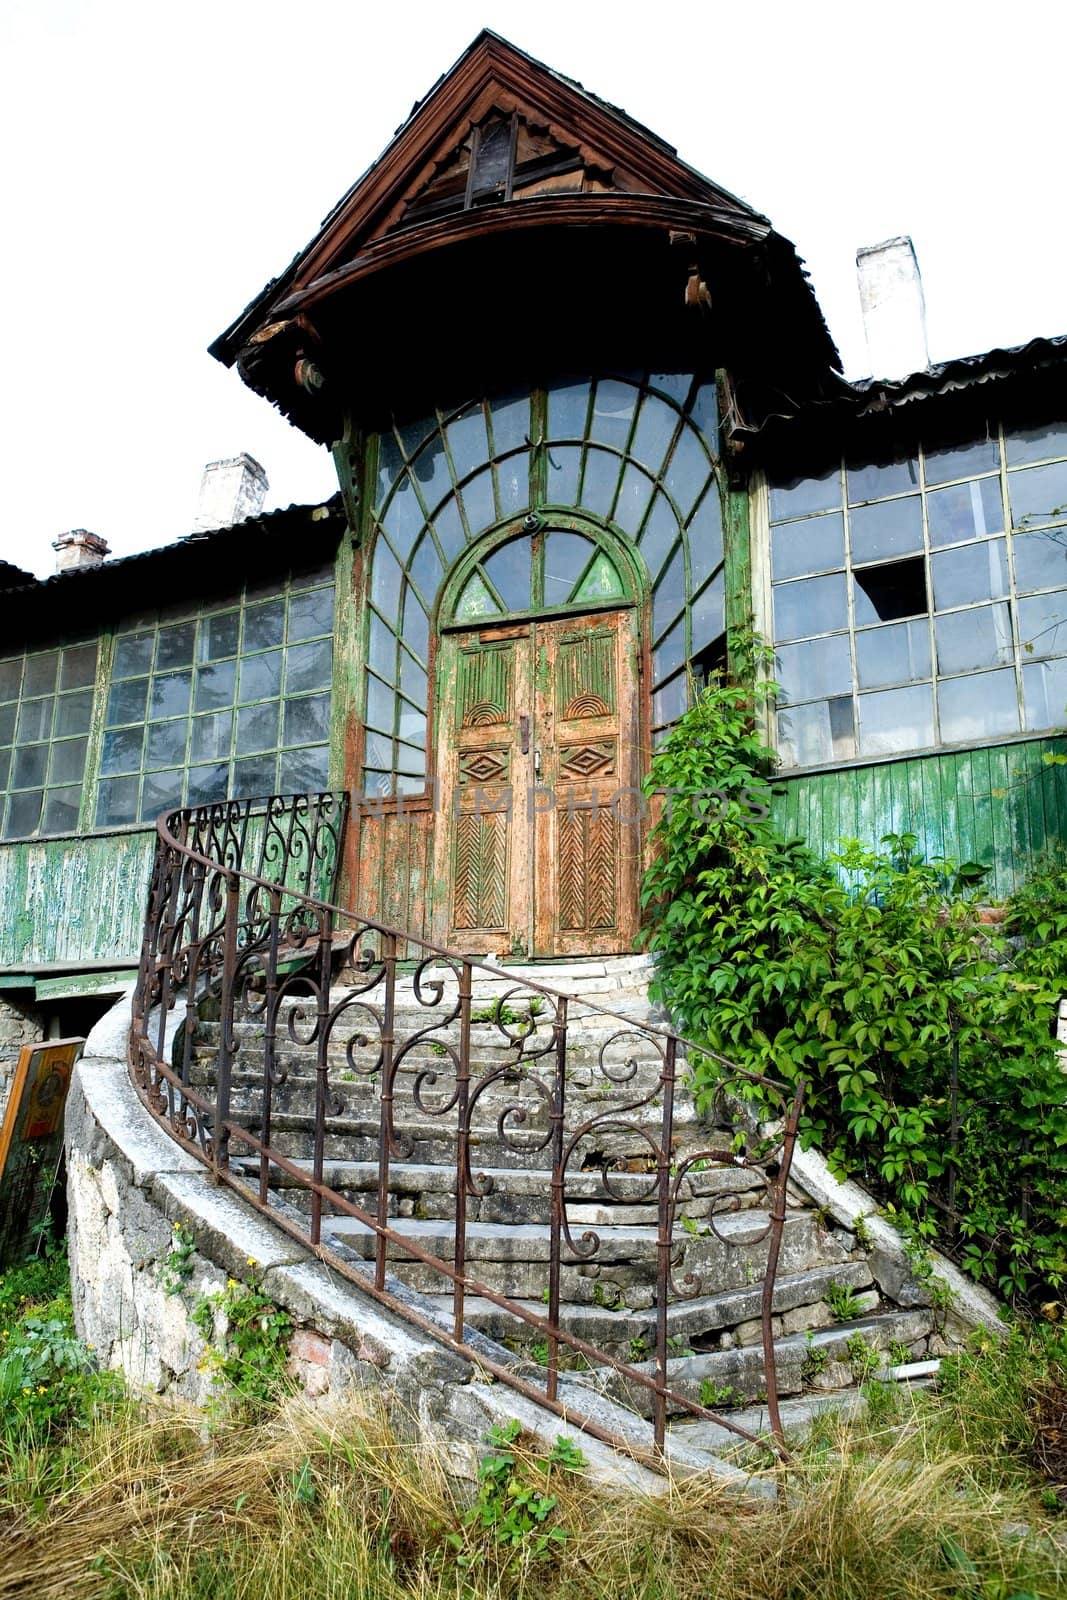 An image of old house with wild grapes